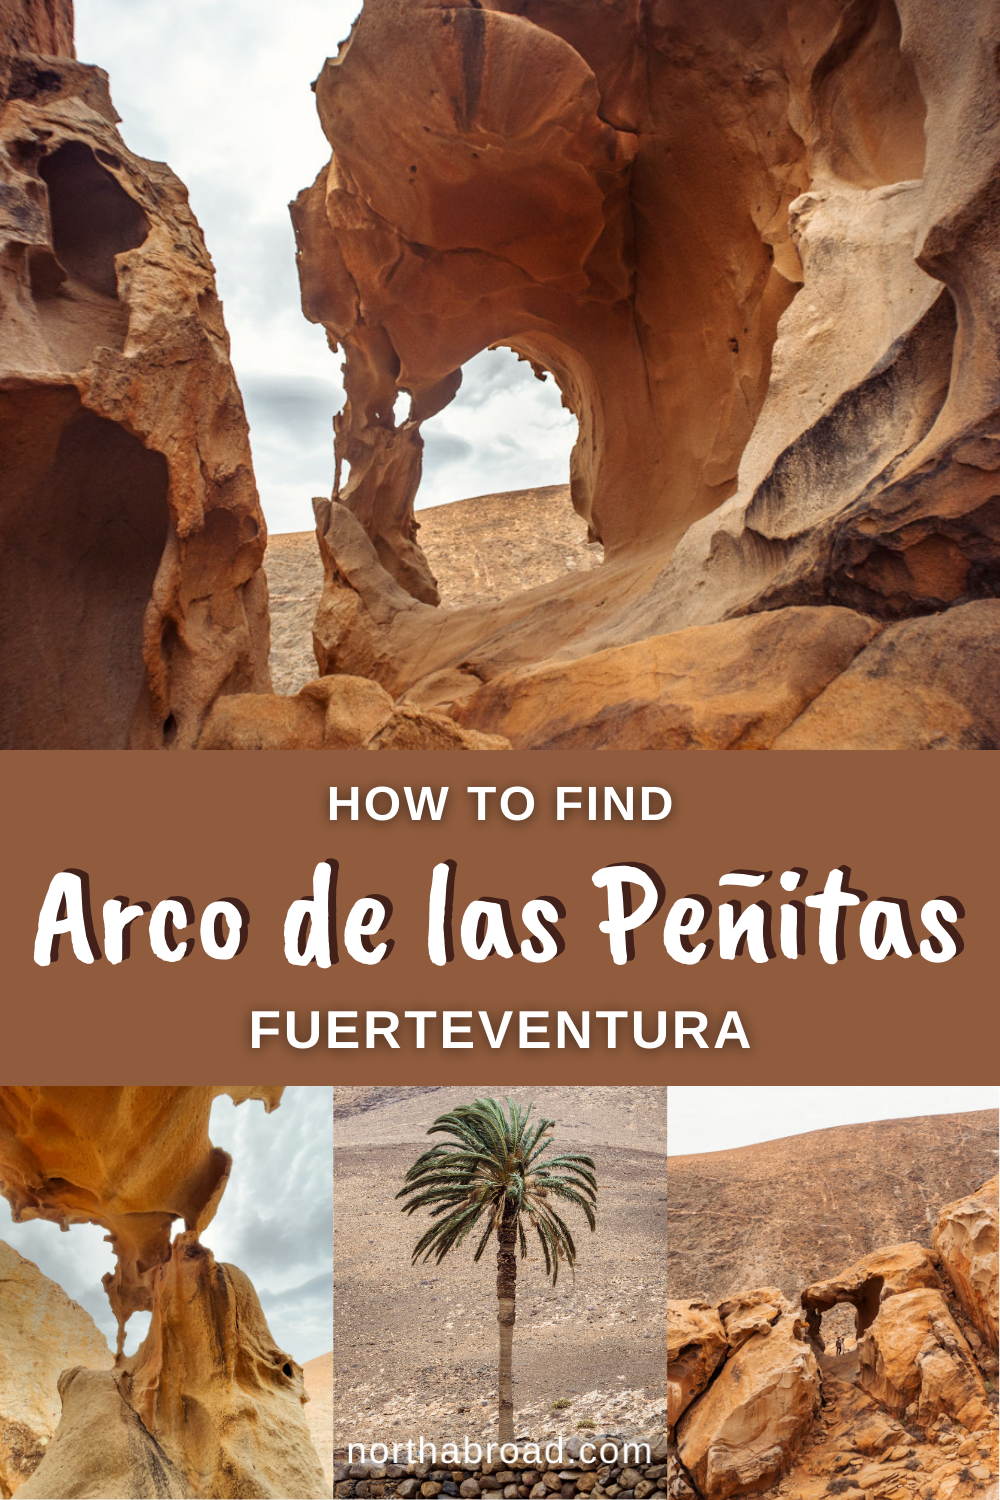 How to hike to Arco de las Peñitas in Fuerteventura (including different routes) and what to expect from the beautiful natural stone arch.